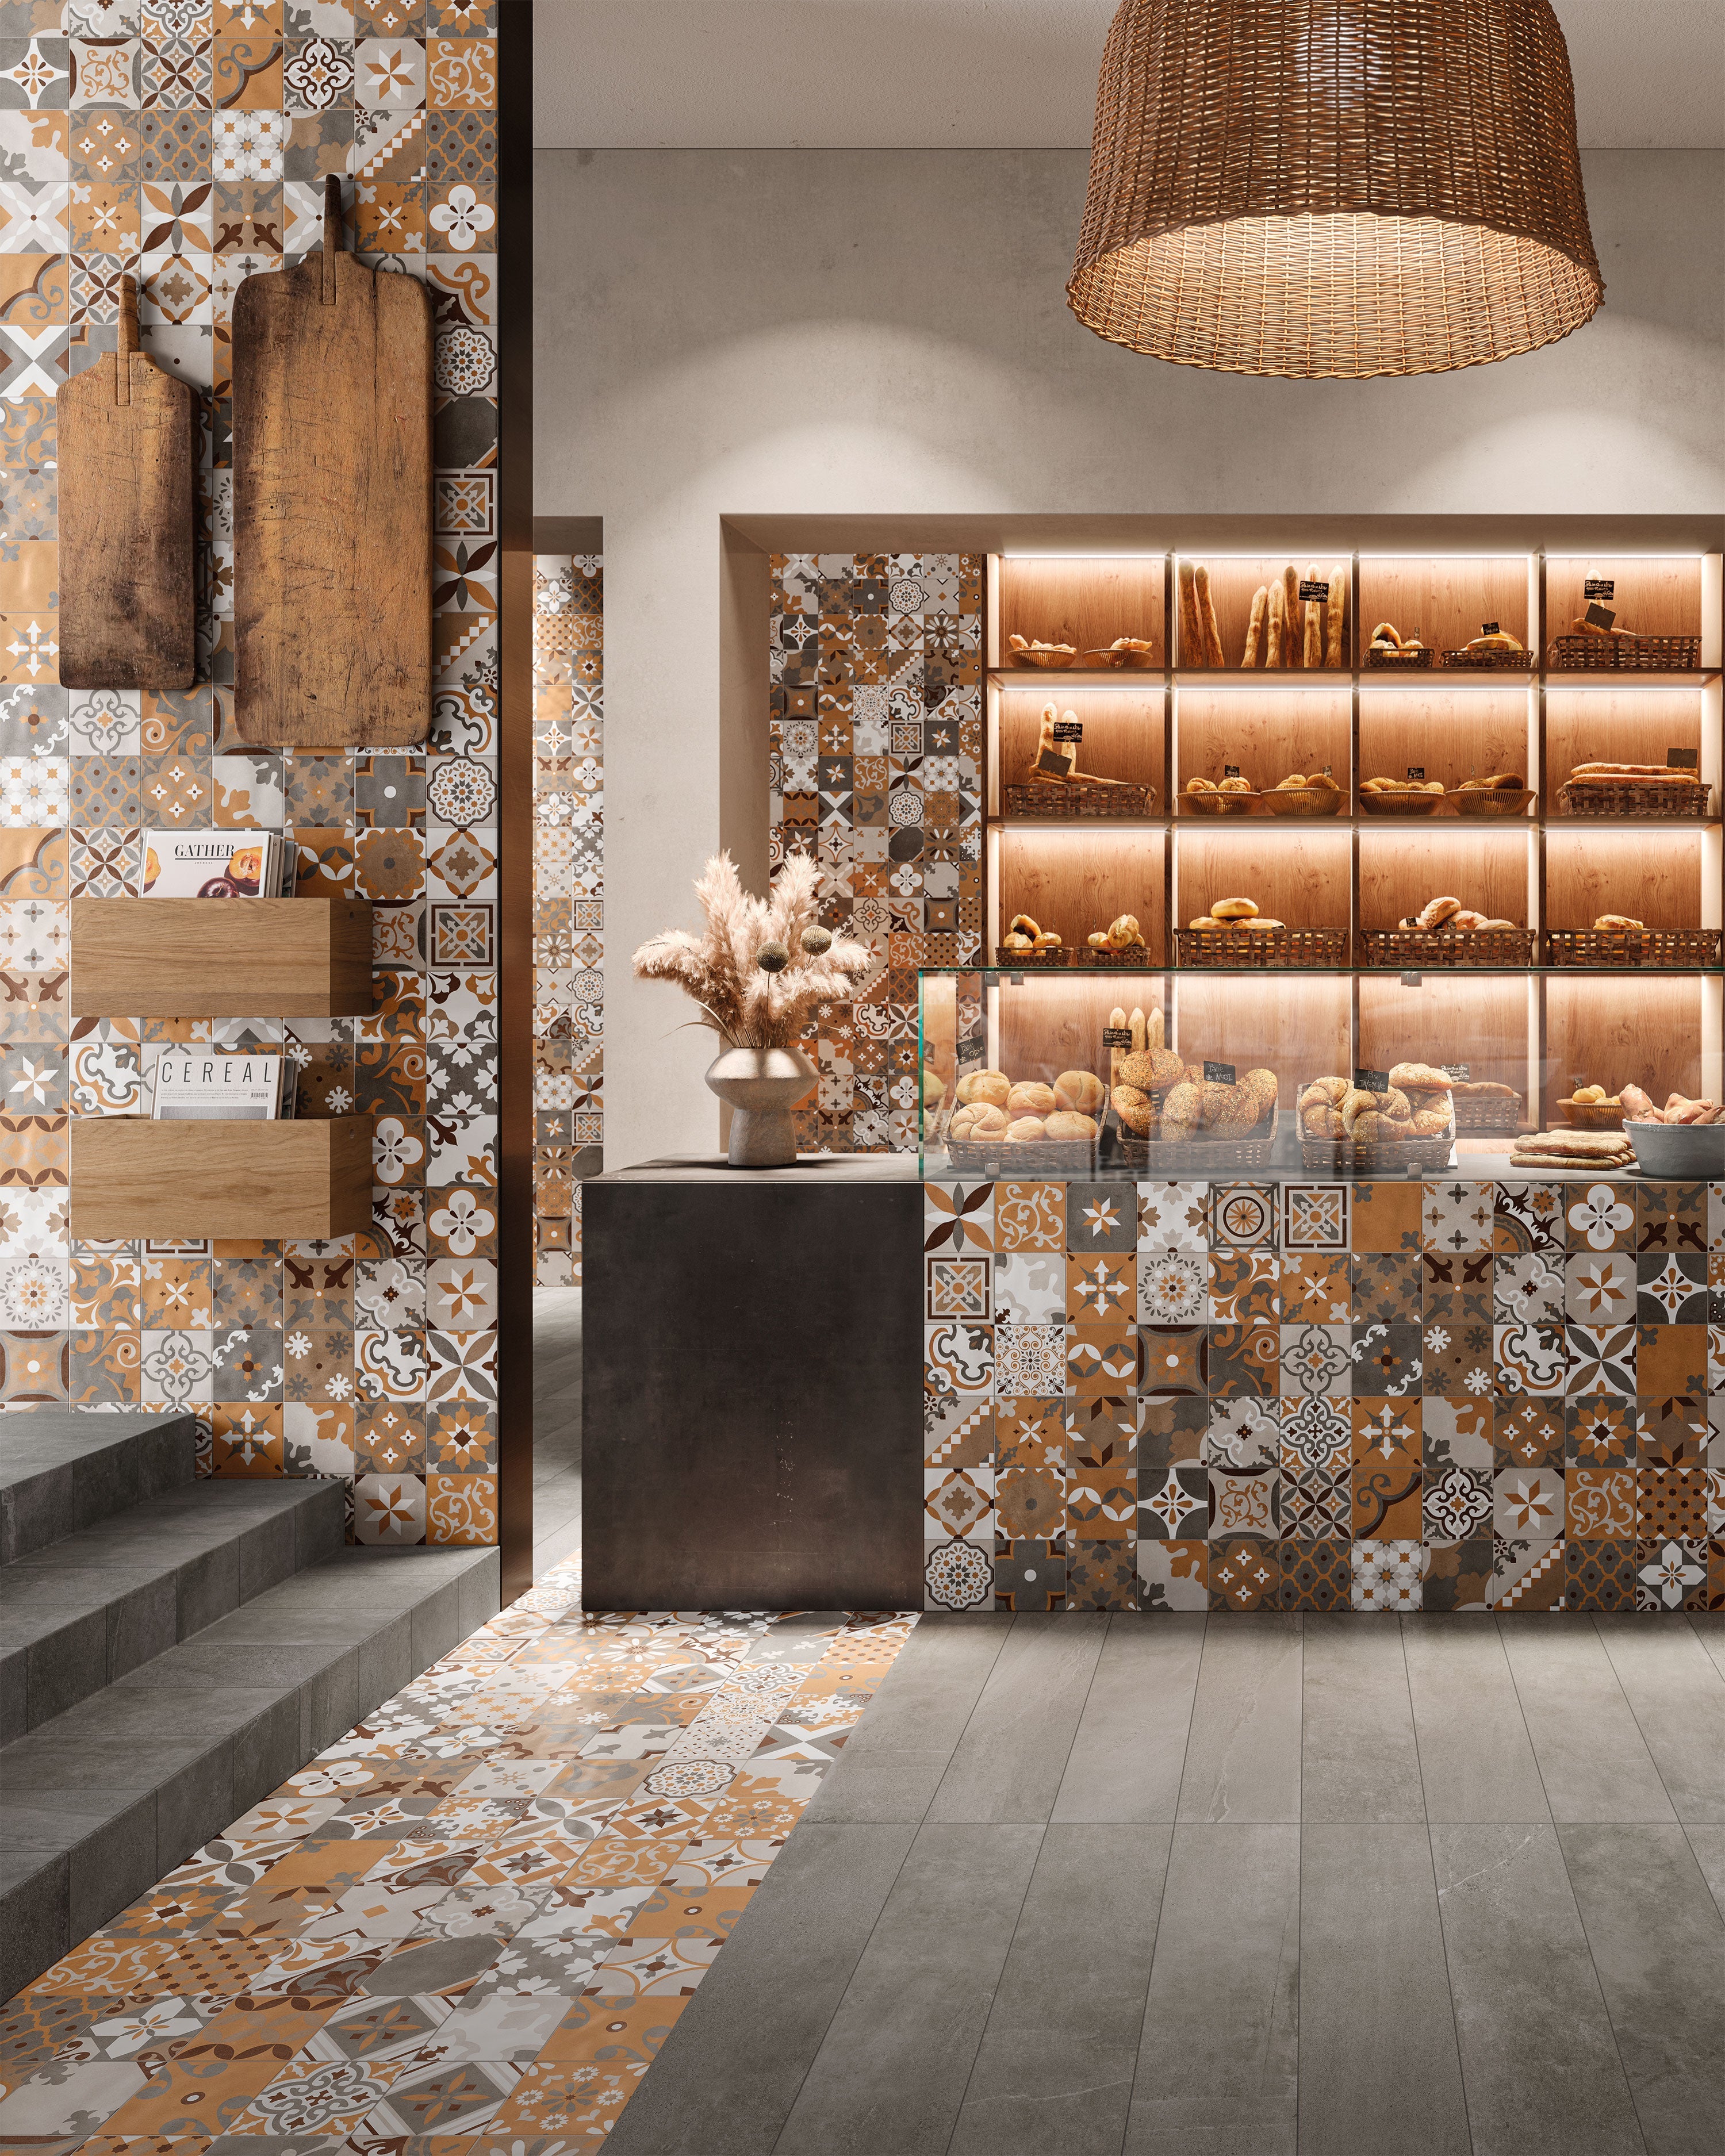 Porcelain tile collection from Surface Group featuring decorative patterned tiles in earth tones for flooring and wall cladding in a modern kitchen setting with wooden shelves and wicker lighting.